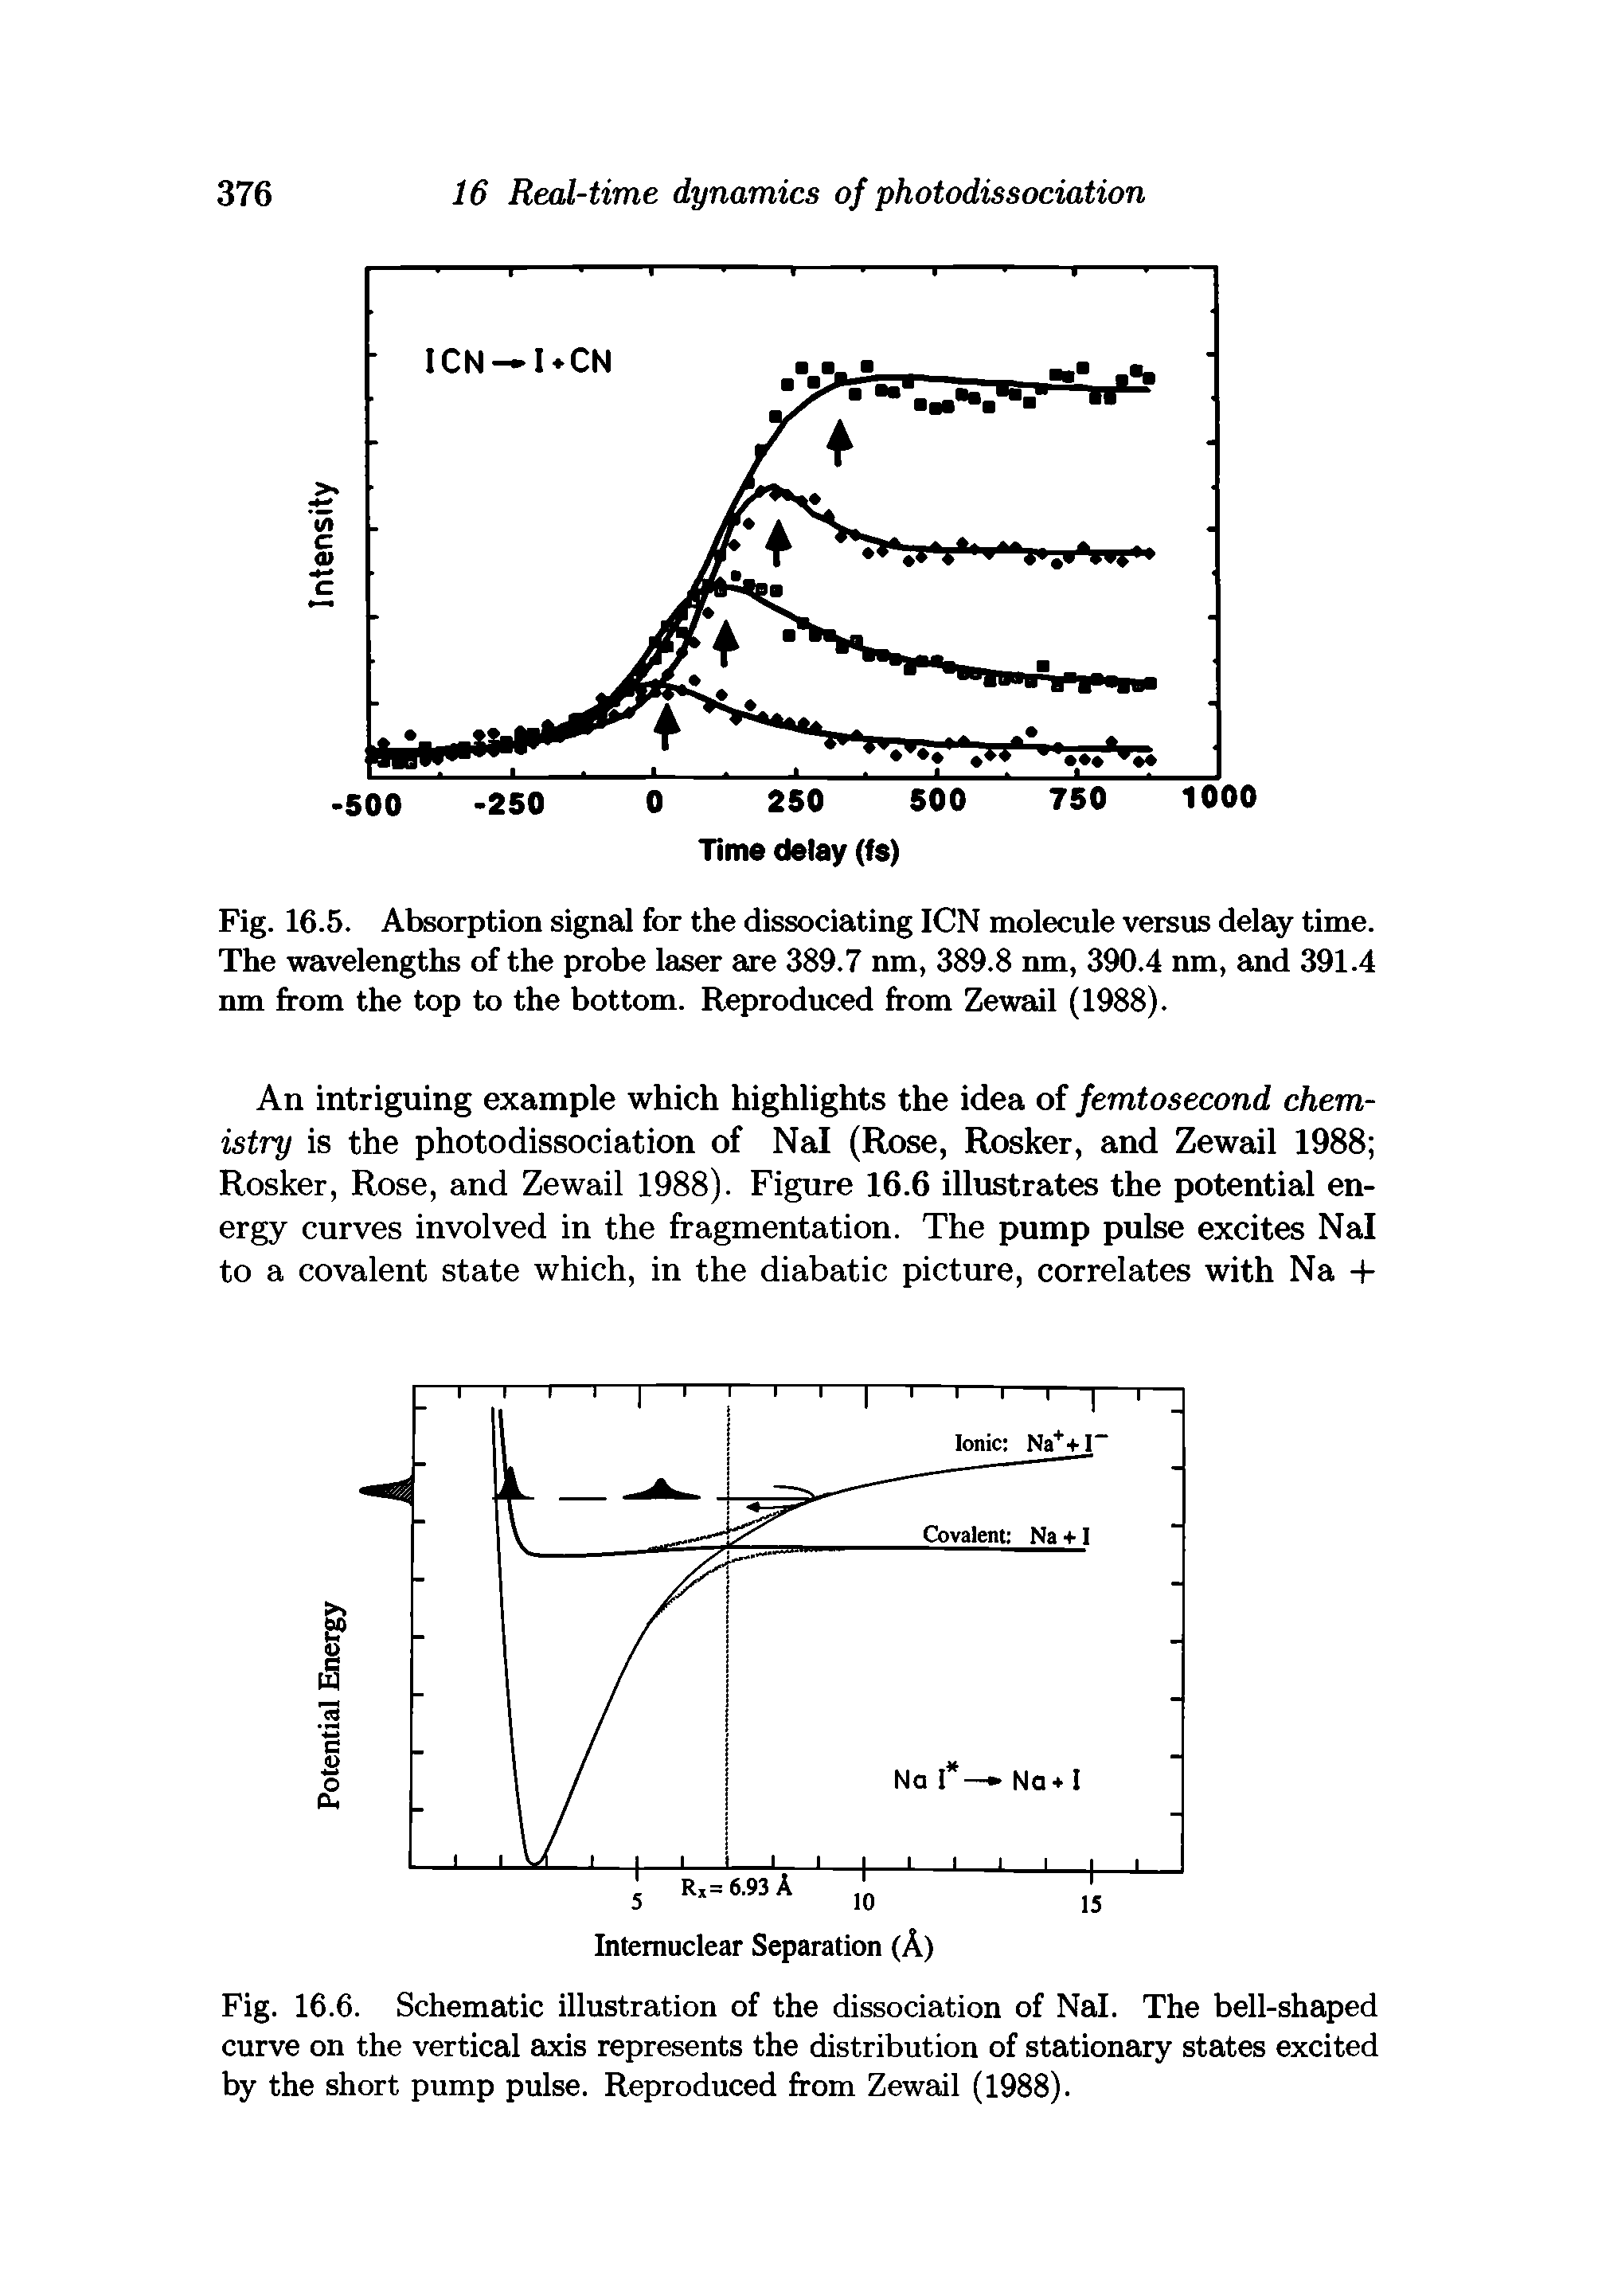 Fig. 16.6. Schematic illustration of the dissociation of Nal. The bell-shaped curve on the vertical axis represents the distribution of stationary states excited by the short pump pulse. Reproduced from Zewail (1988).